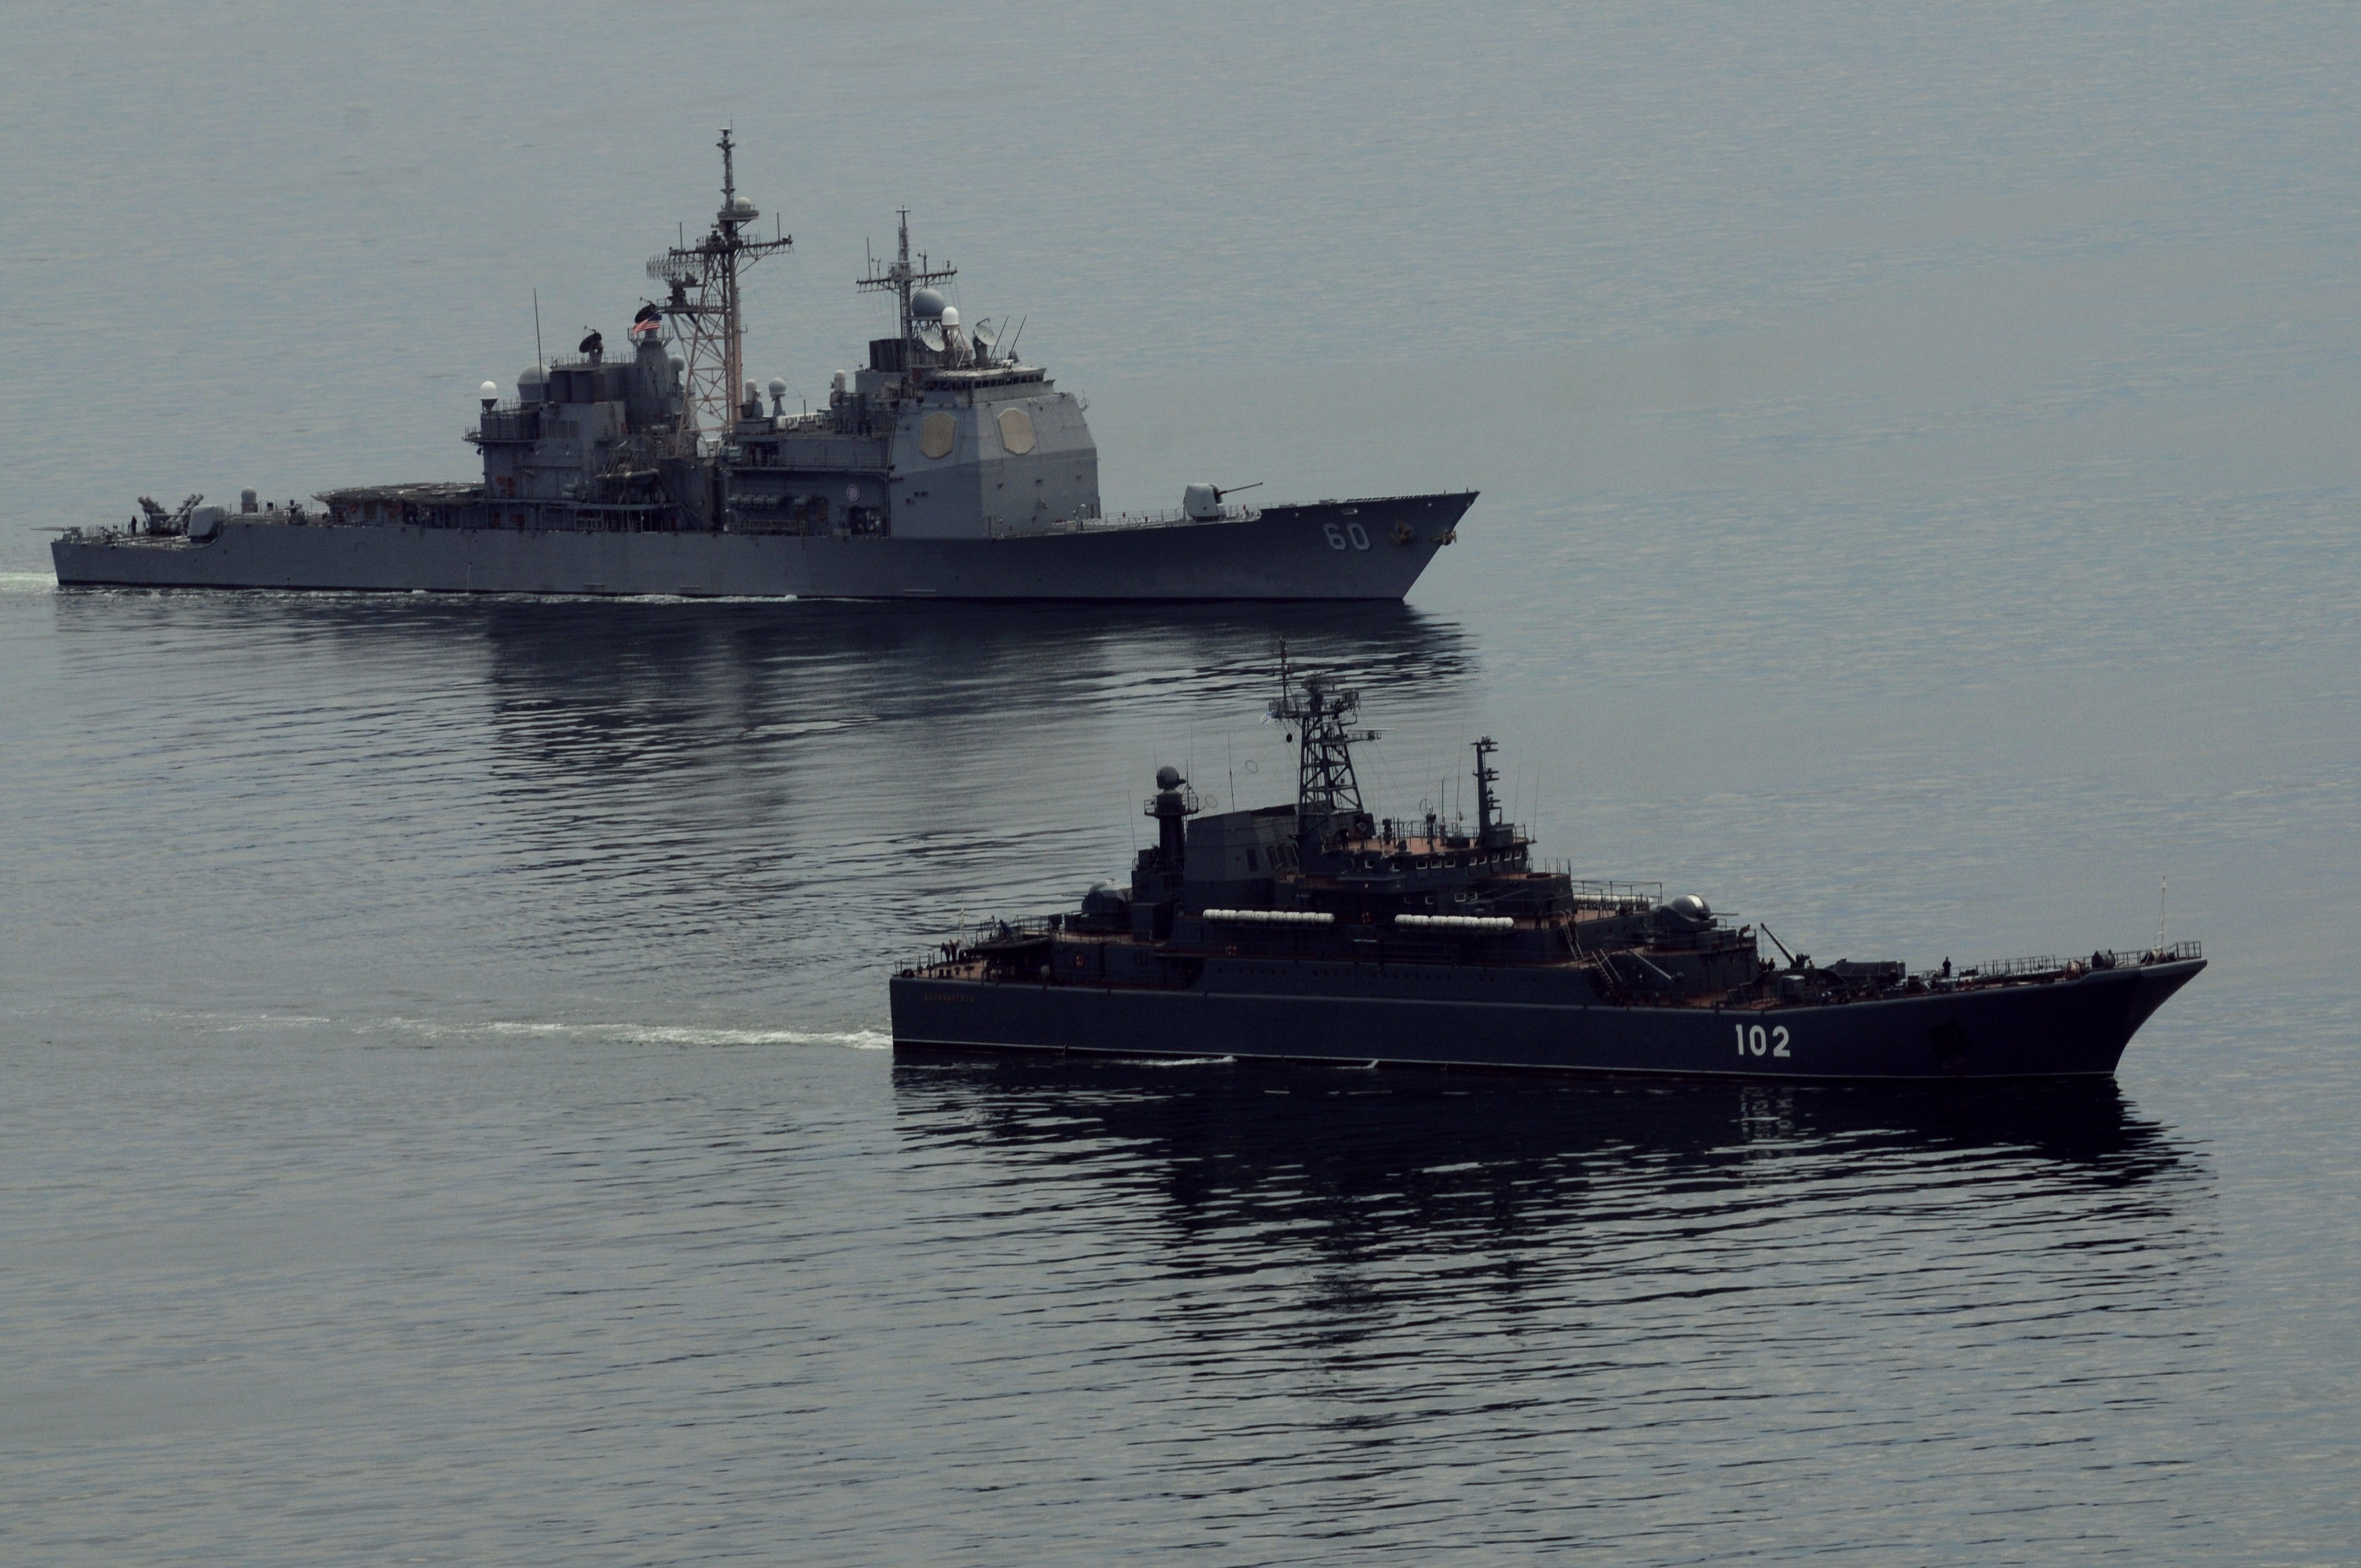 USS Normandy (CG-60), left, and the Russian amphibious ship RFS Kaliningrad (LSTM 102) conduct anti-piracy training during the Baltic Operations (BALTOPS) 2012 exercise. US Navy Photo